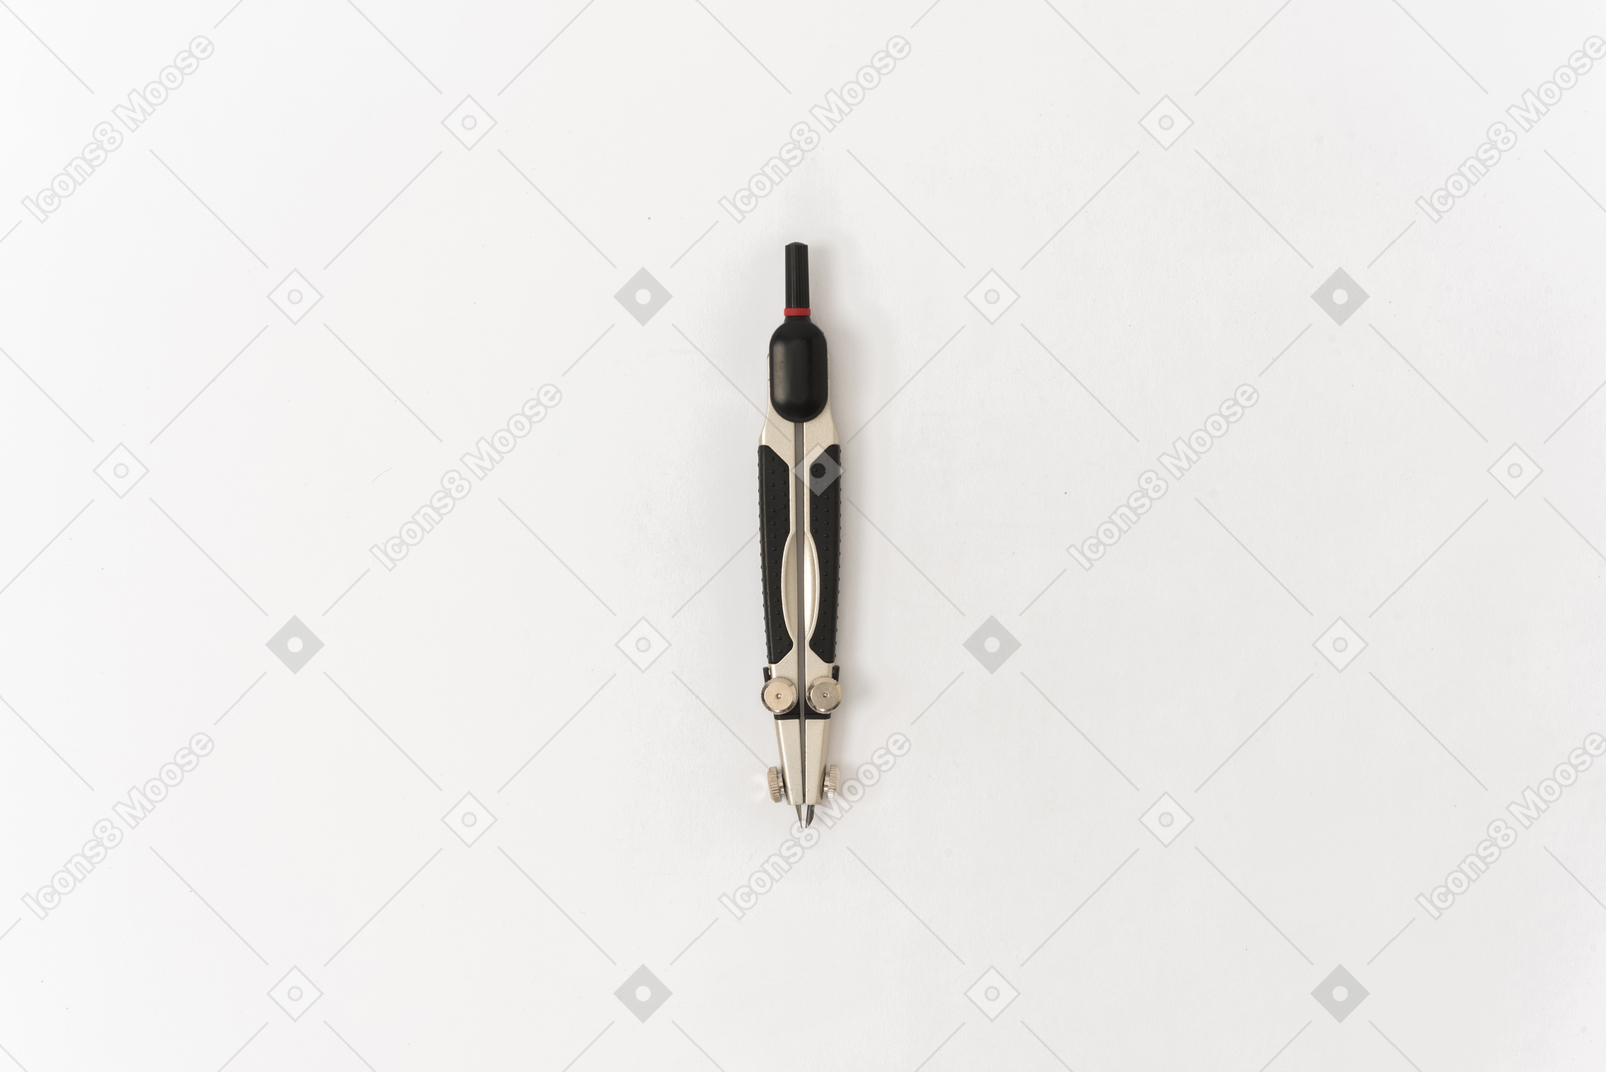 Black dividers on a white background